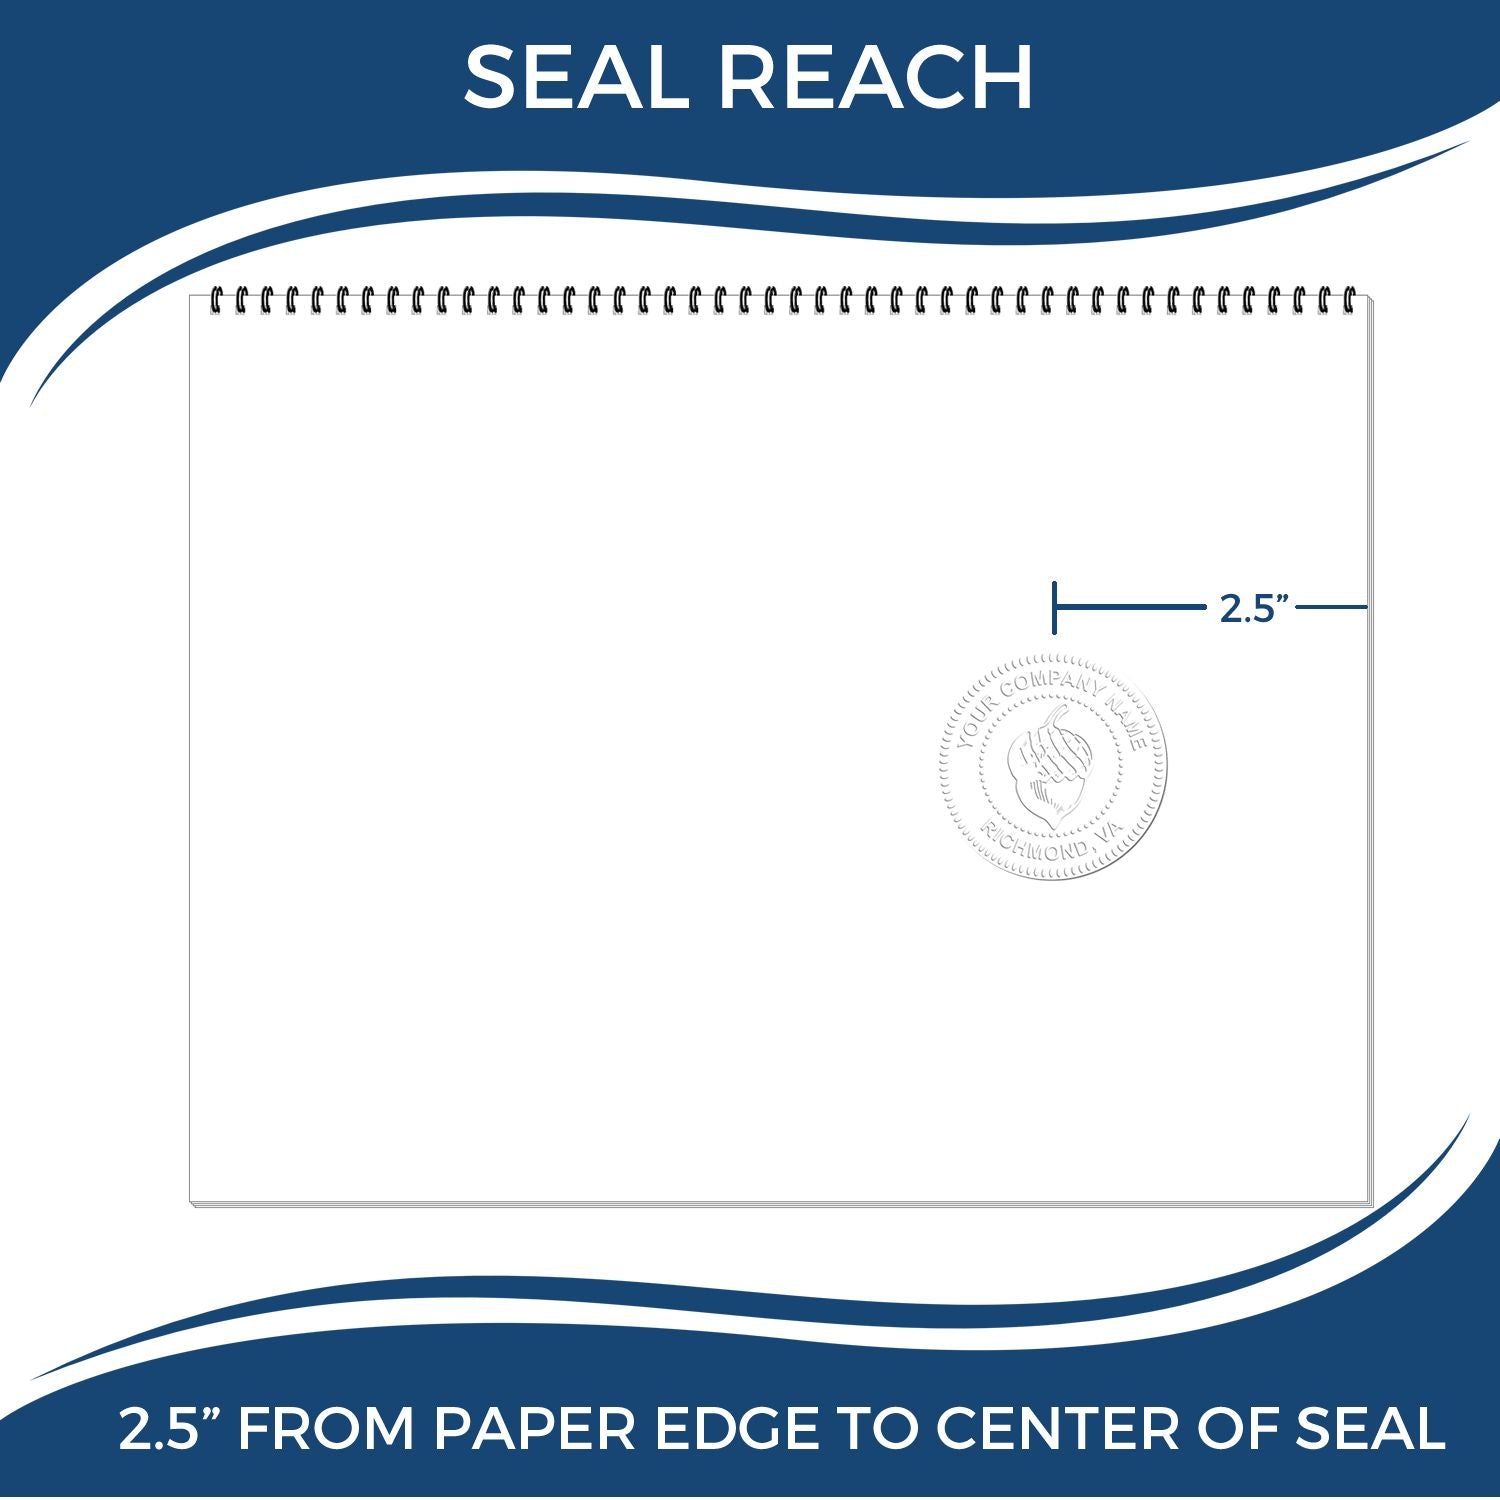 An infographic showing the seal reach which is represented by a ruler and a miniature seal image of the State of Wyoming Long Reach Architectural Embossing Seal